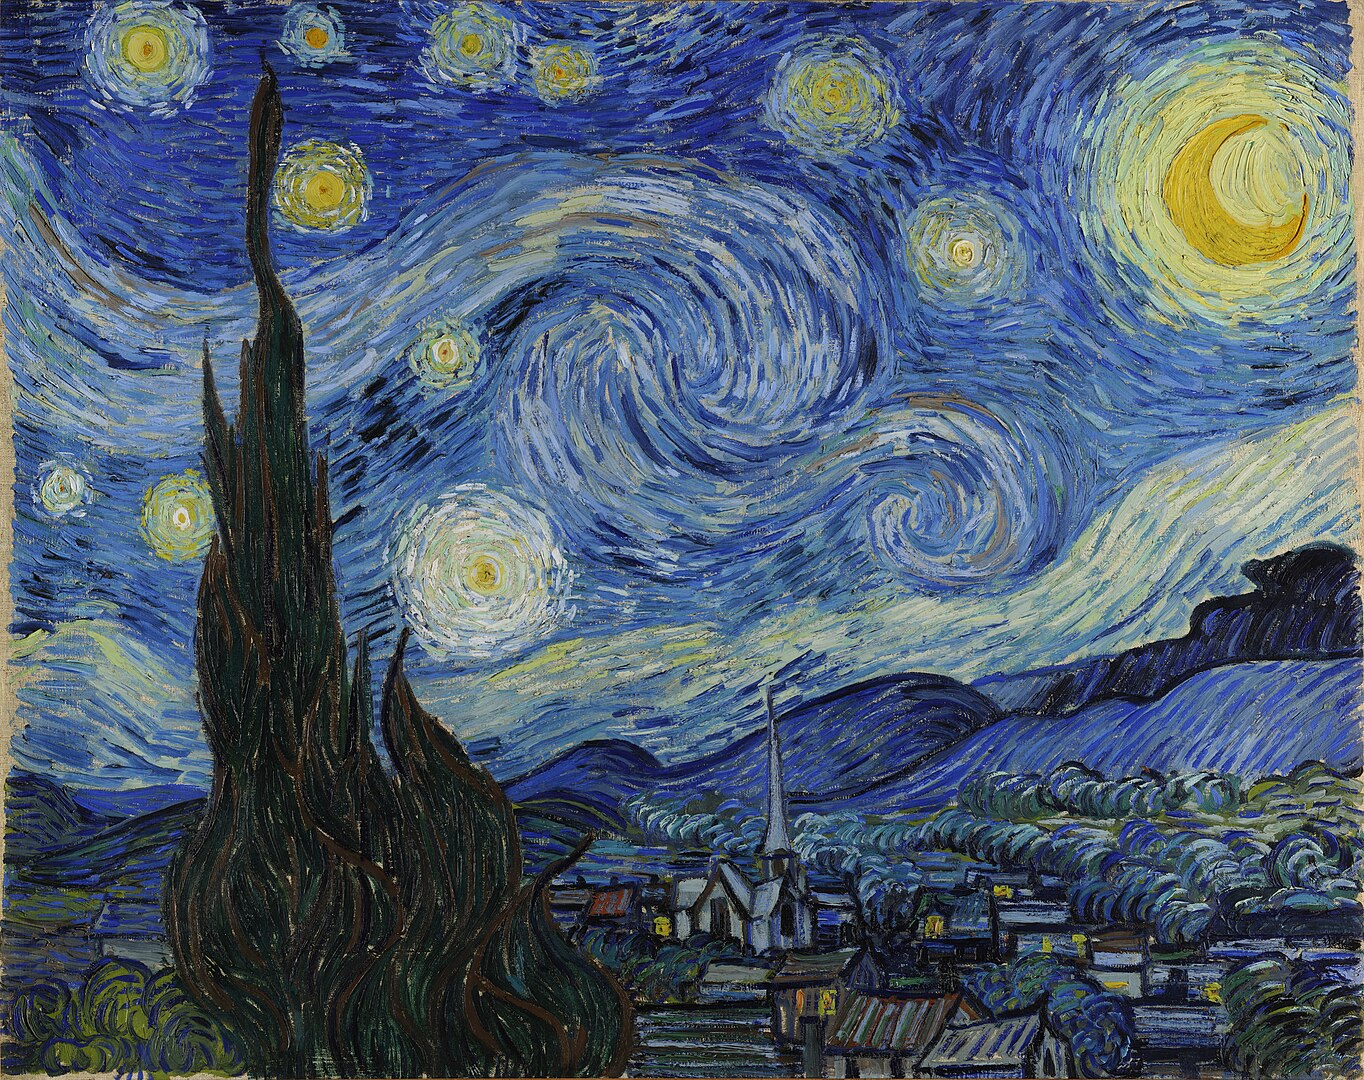 The Starry Night" by Vincent van Gogh (1889)